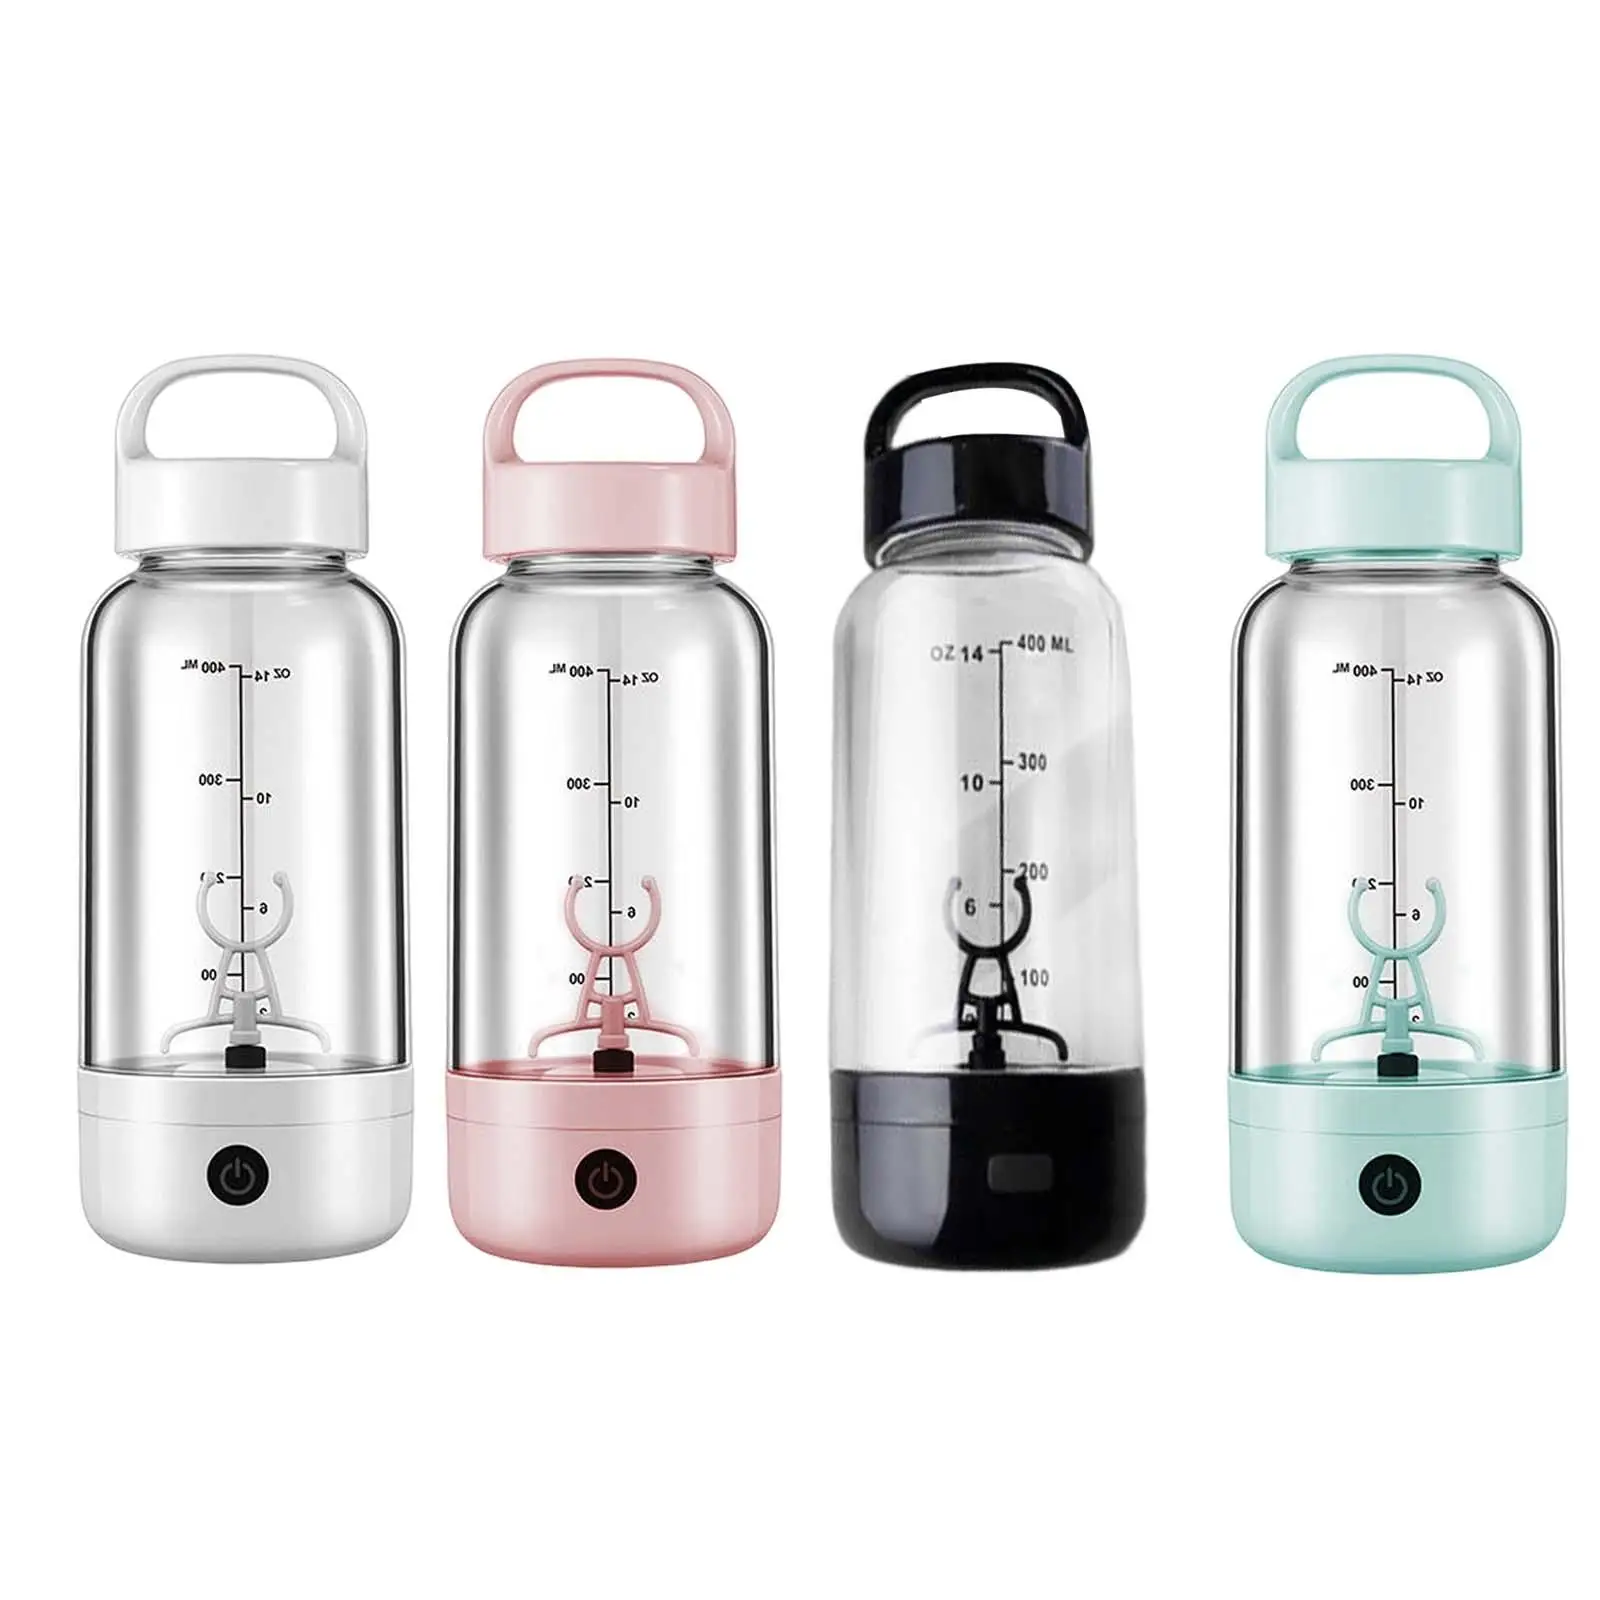 500ml Electric Protein Shaker Bottle USB Eddy Mixer Bottle Automatic Blender Mixing Bottle for Sports Workout Exercise Home Gym